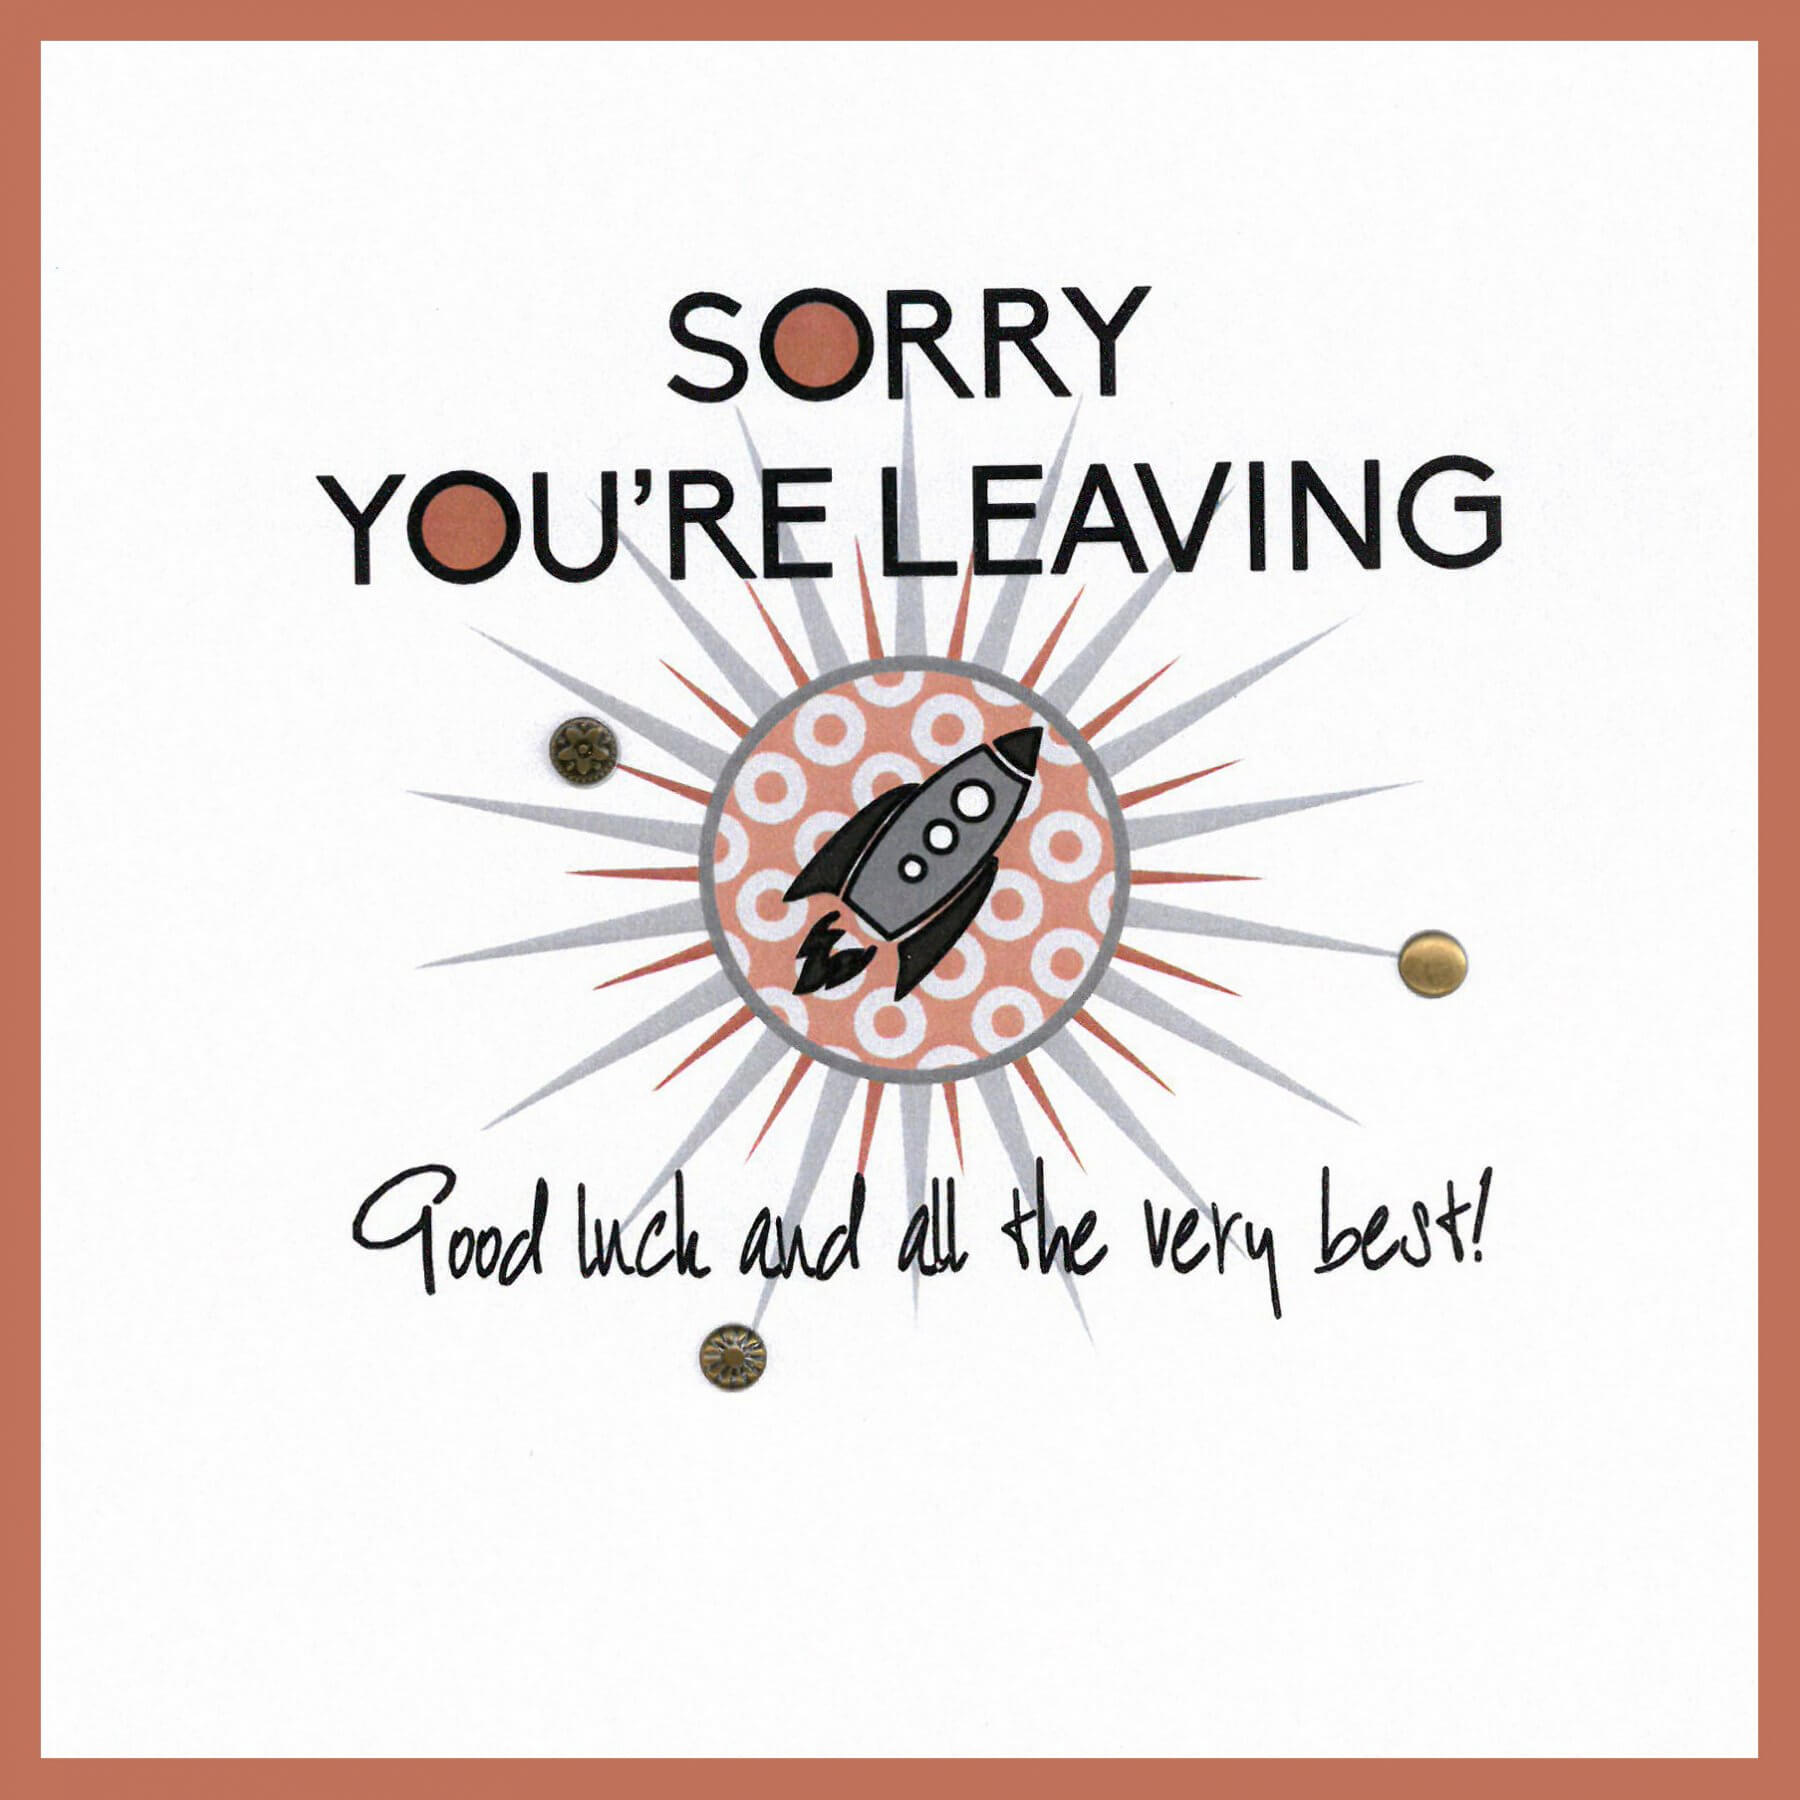 Sorry You're Leaving – Good Luck And All The Very Best! Pertaining To Sorry You Re Leaving Card Template